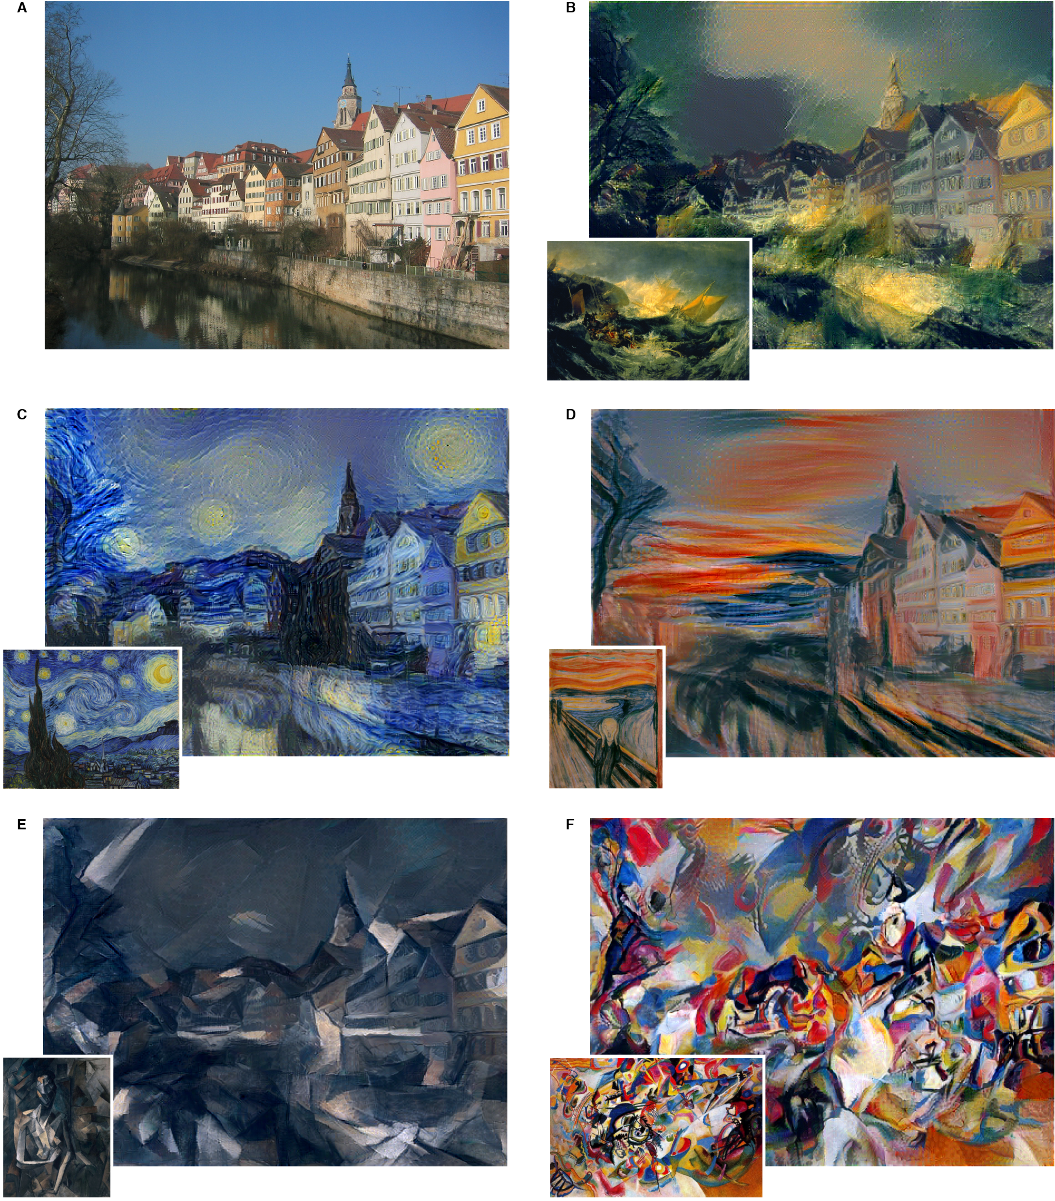 Right: The exhibit photo for A Neural Algorithm of Artistic Style